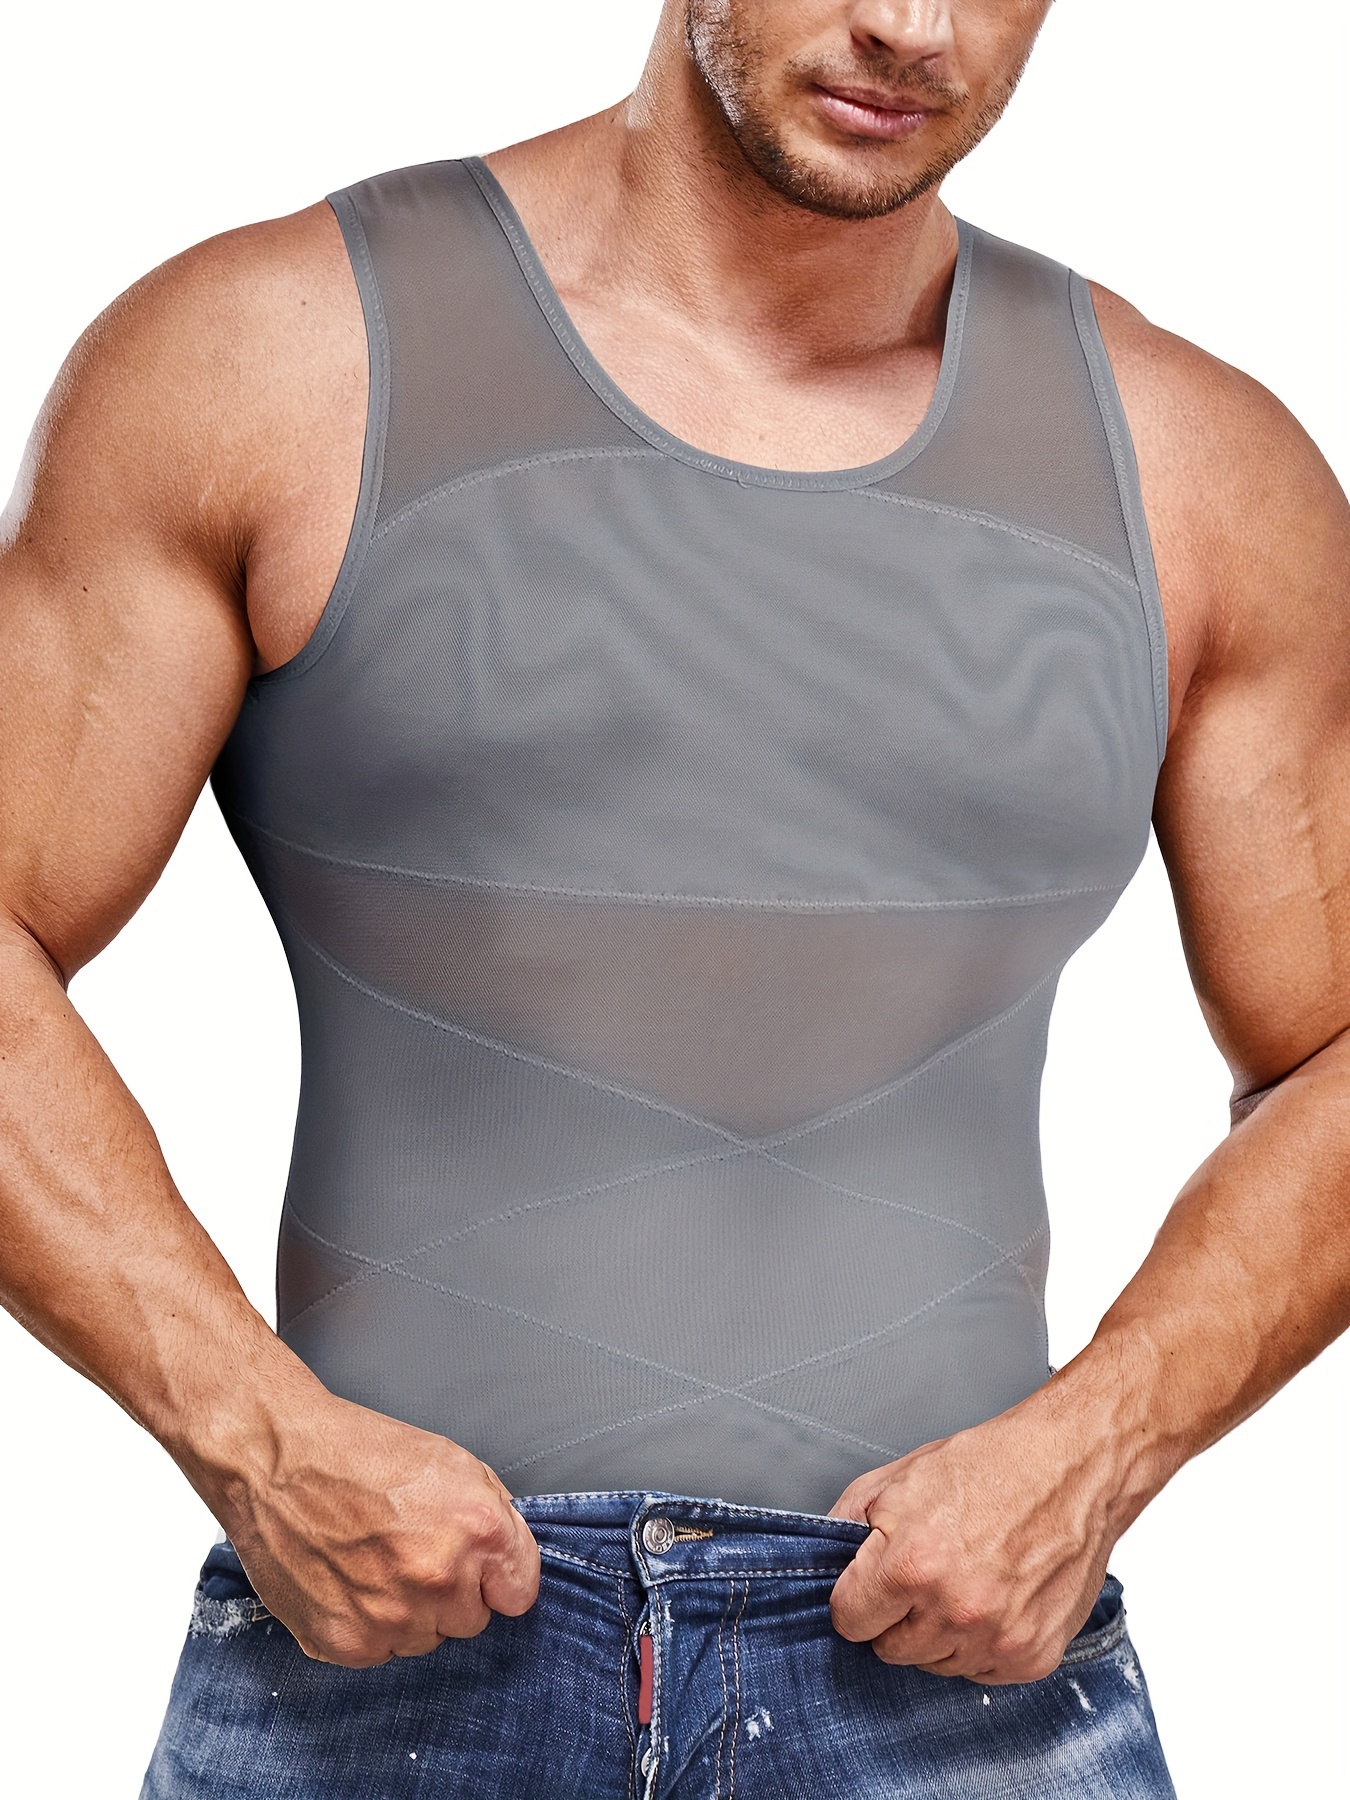 TAILONG Men Compression Shirt for Body Slimming Tank Top Shaper